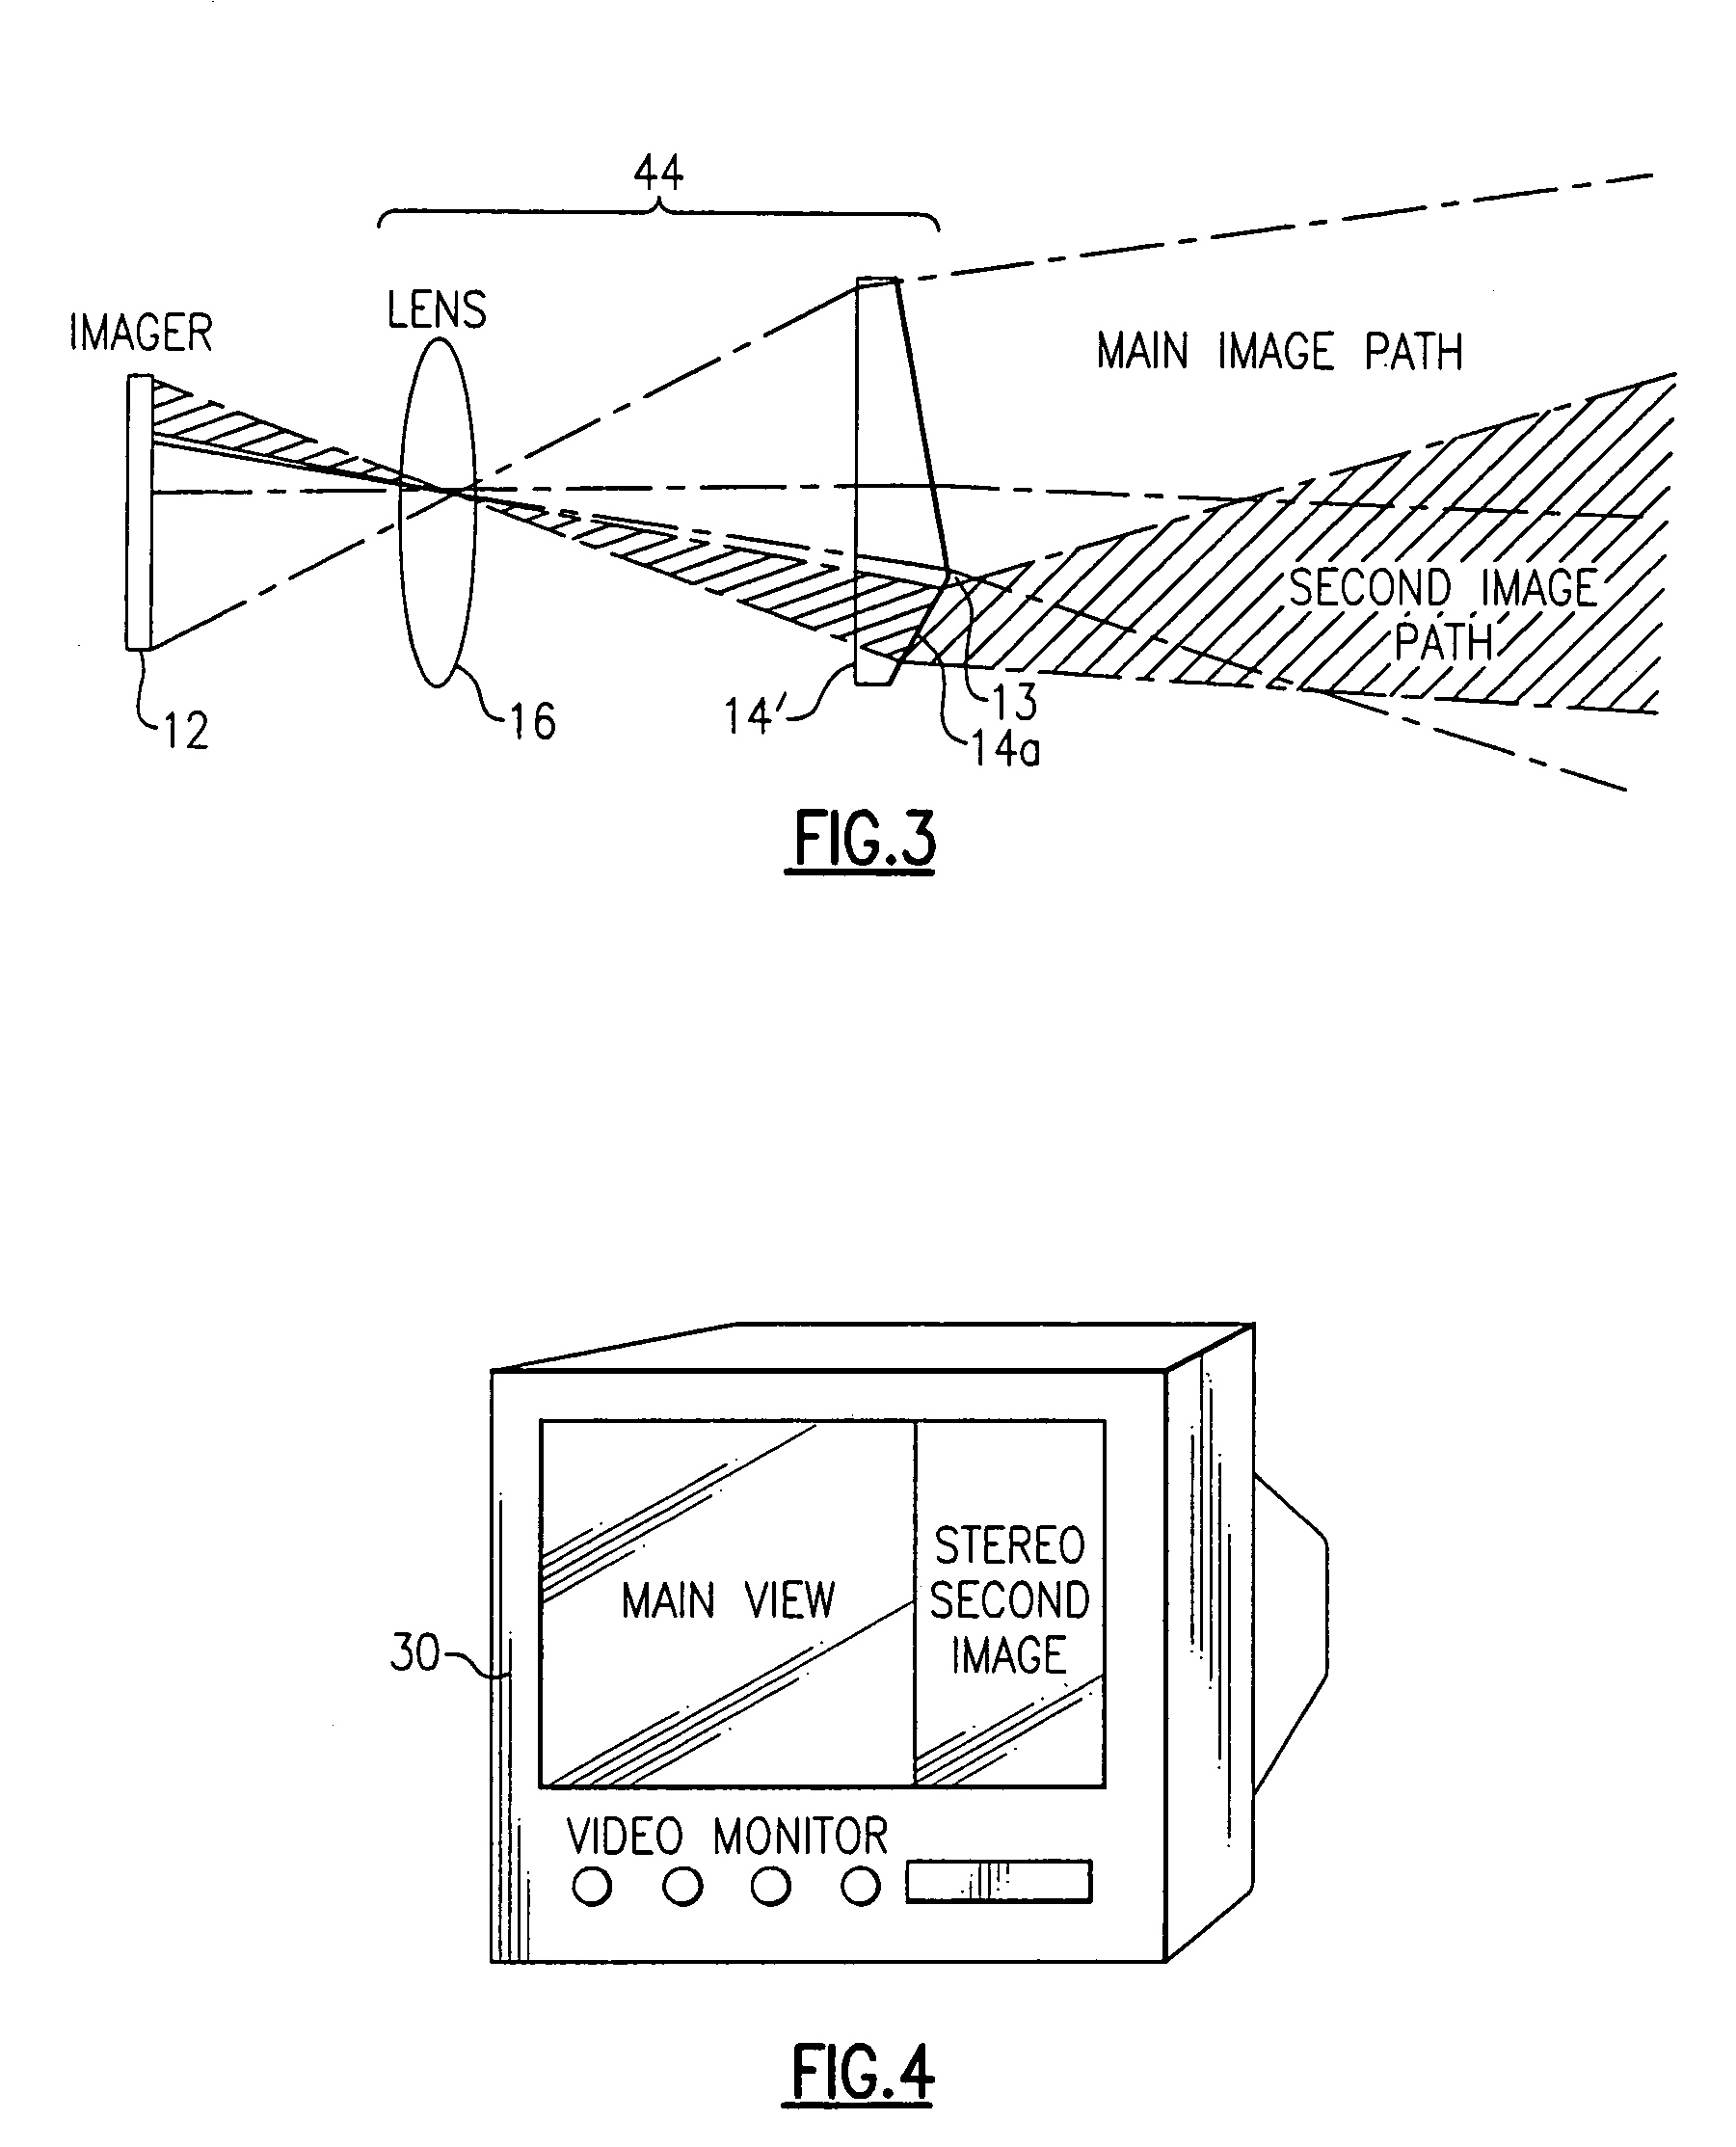 Stereo-measurement borescope with 3-D viewing